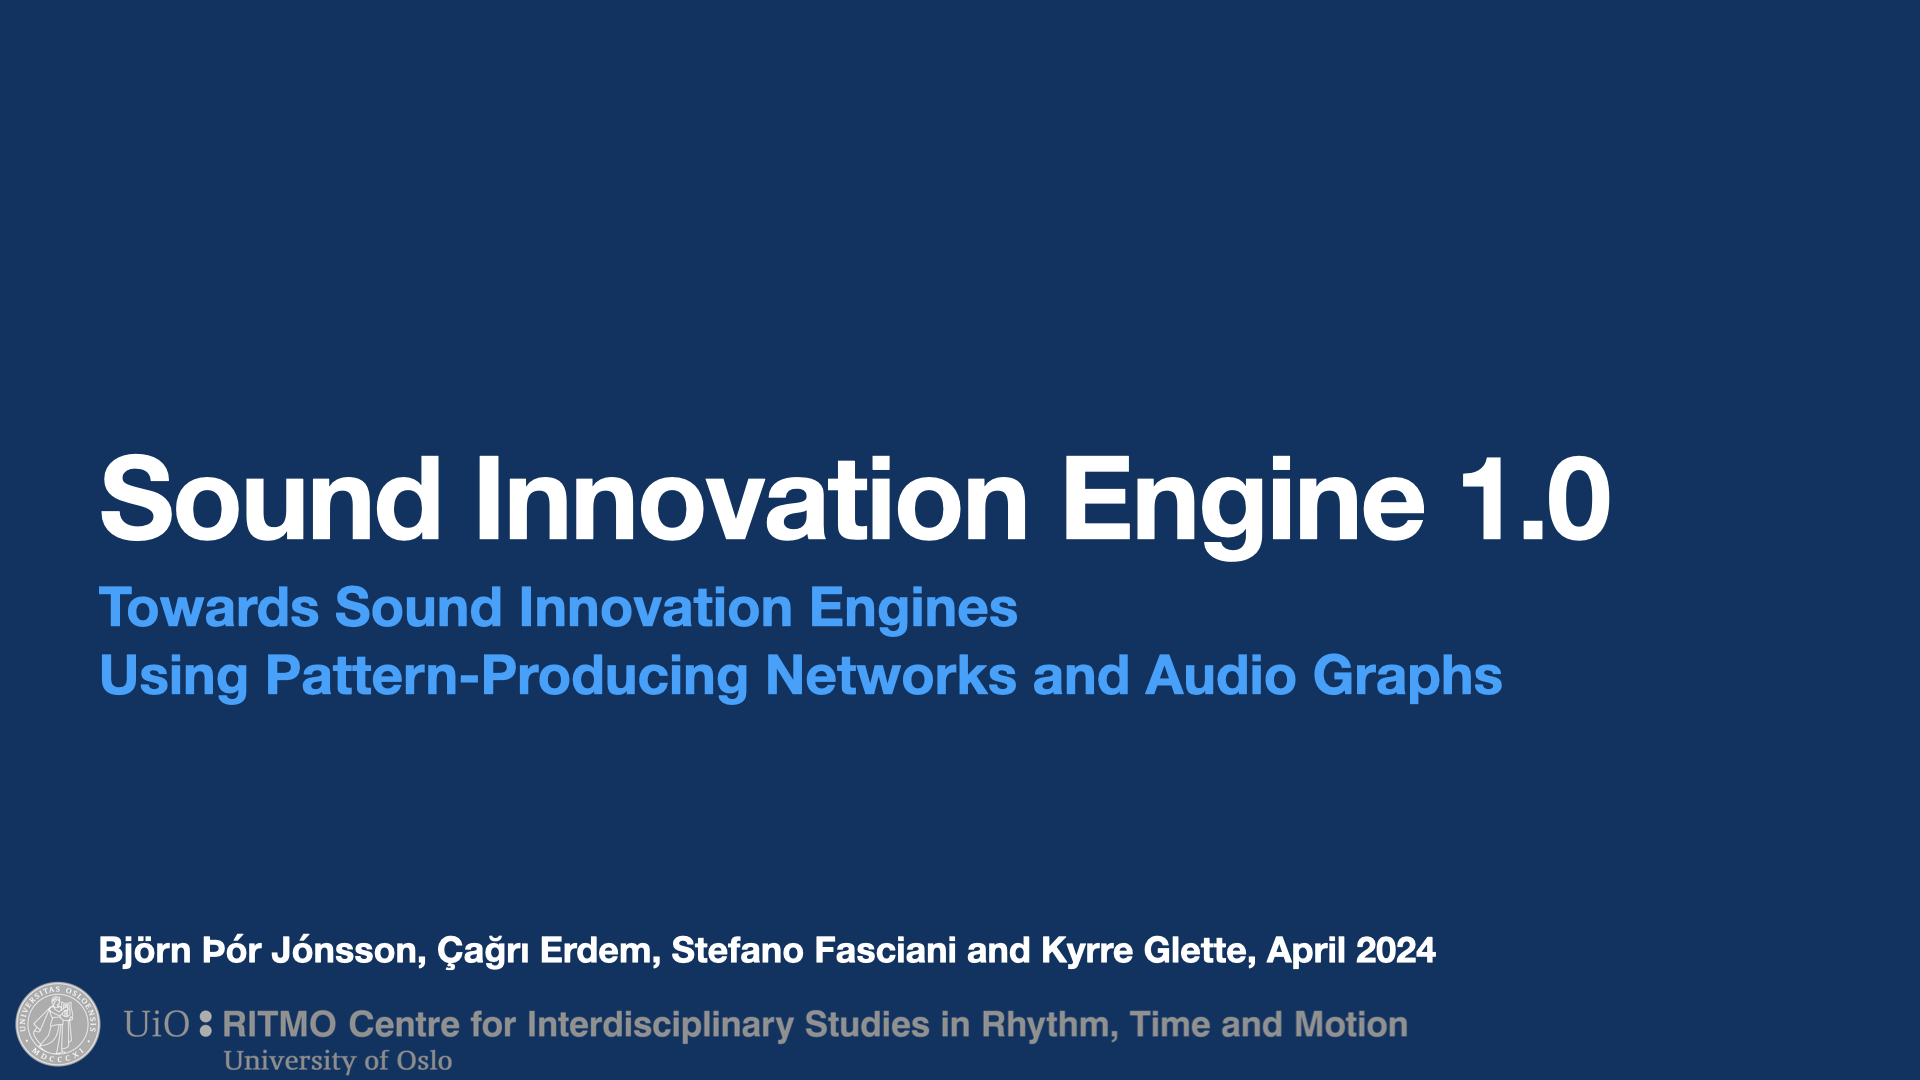 Sound Innovation Engine 1.0 Towards Sound Innovation Engines Using Pattern-Producing Networks and Audio Graphs